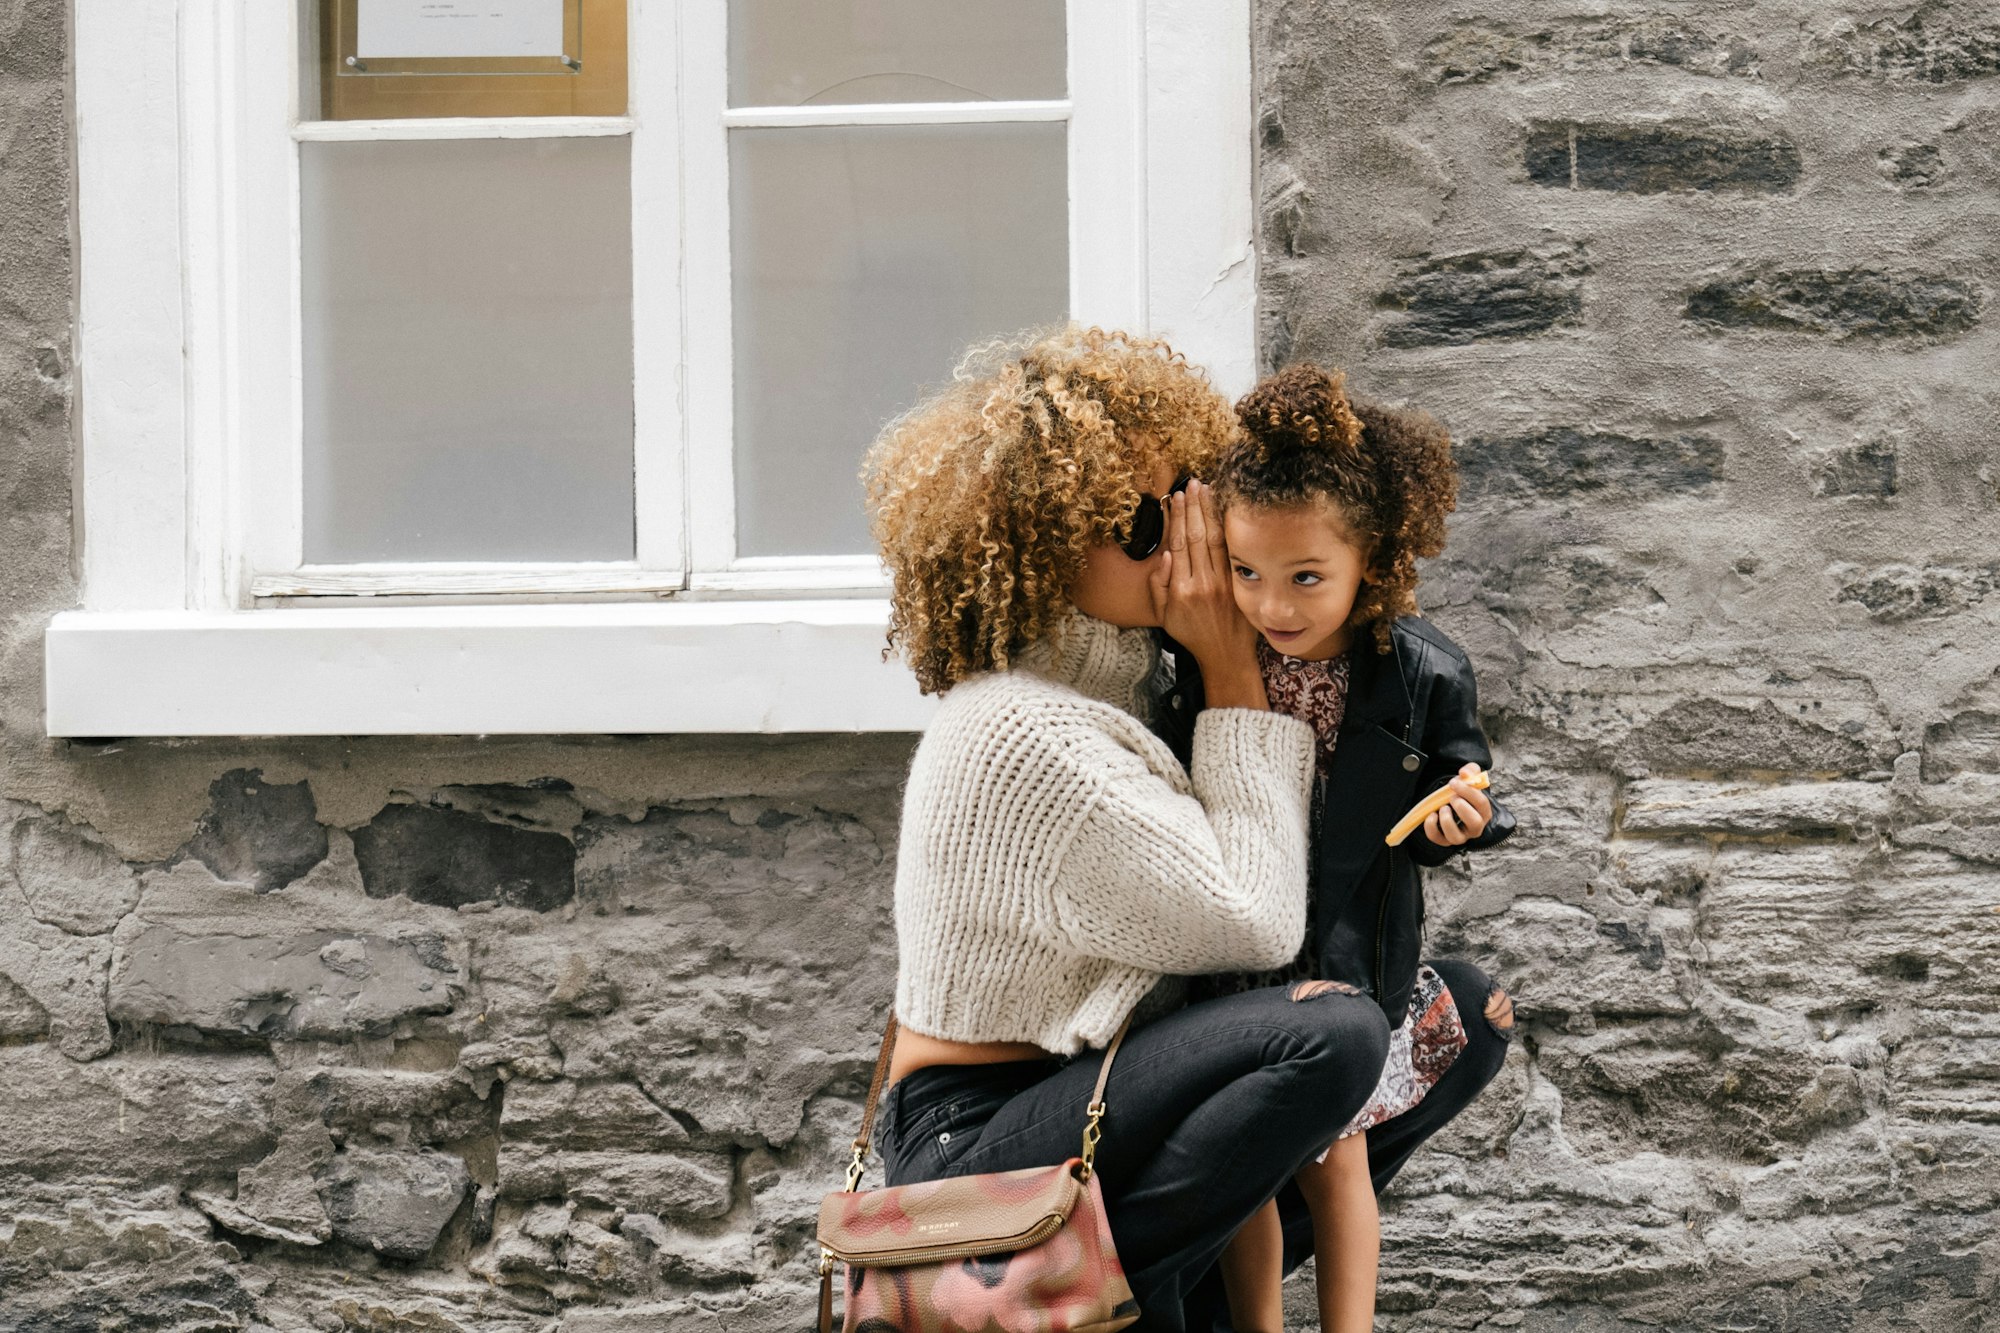 A light-skinned black woman crouched down beside her daughter whispering in her ear.